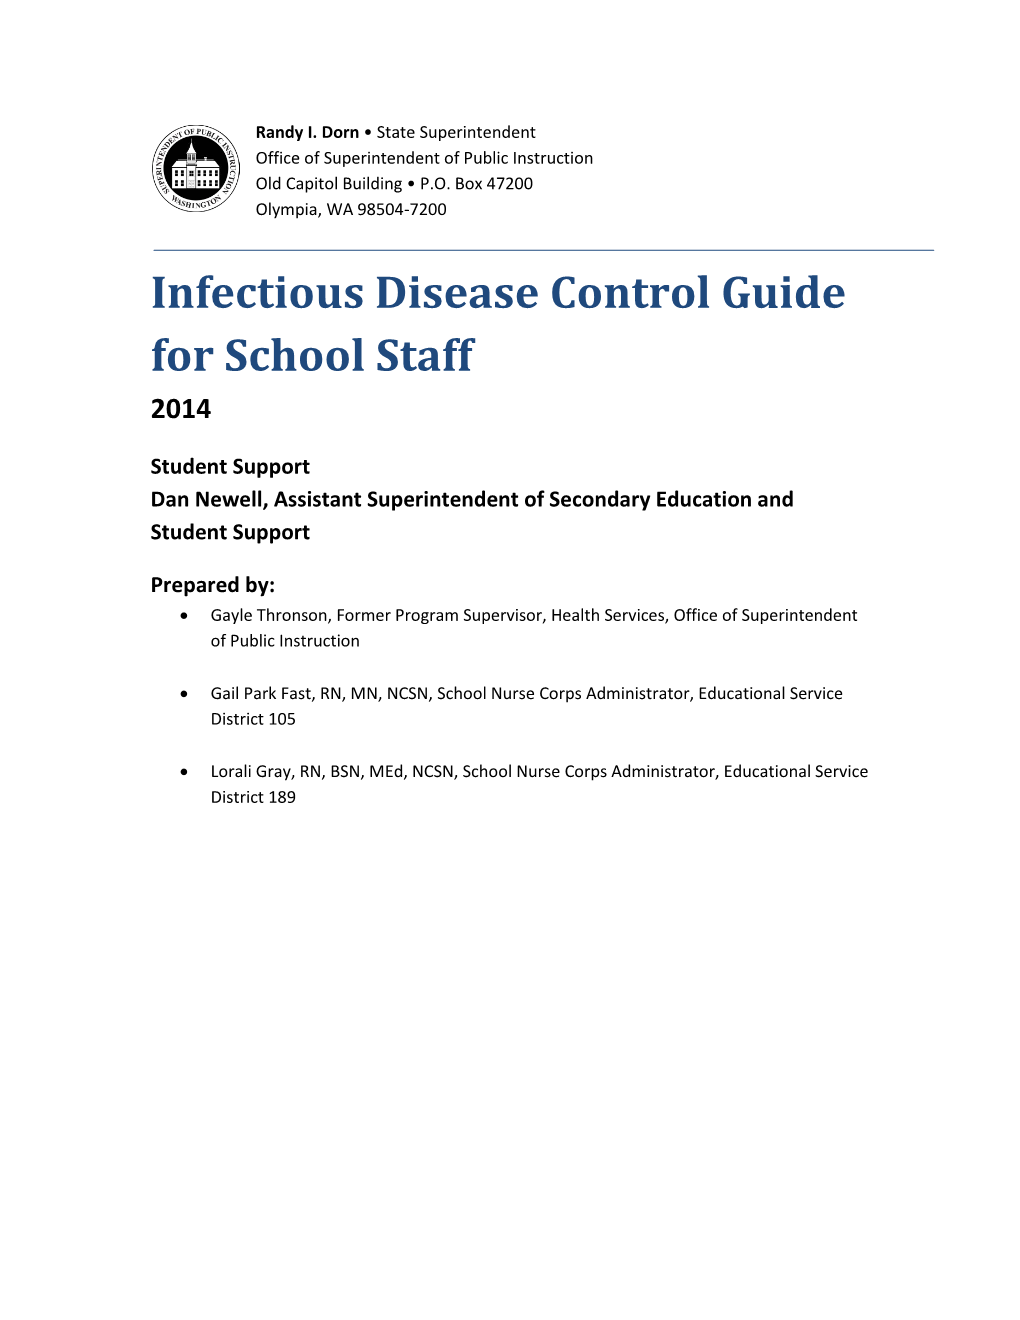 Infectious Disease Control Guide for School Staff 2014